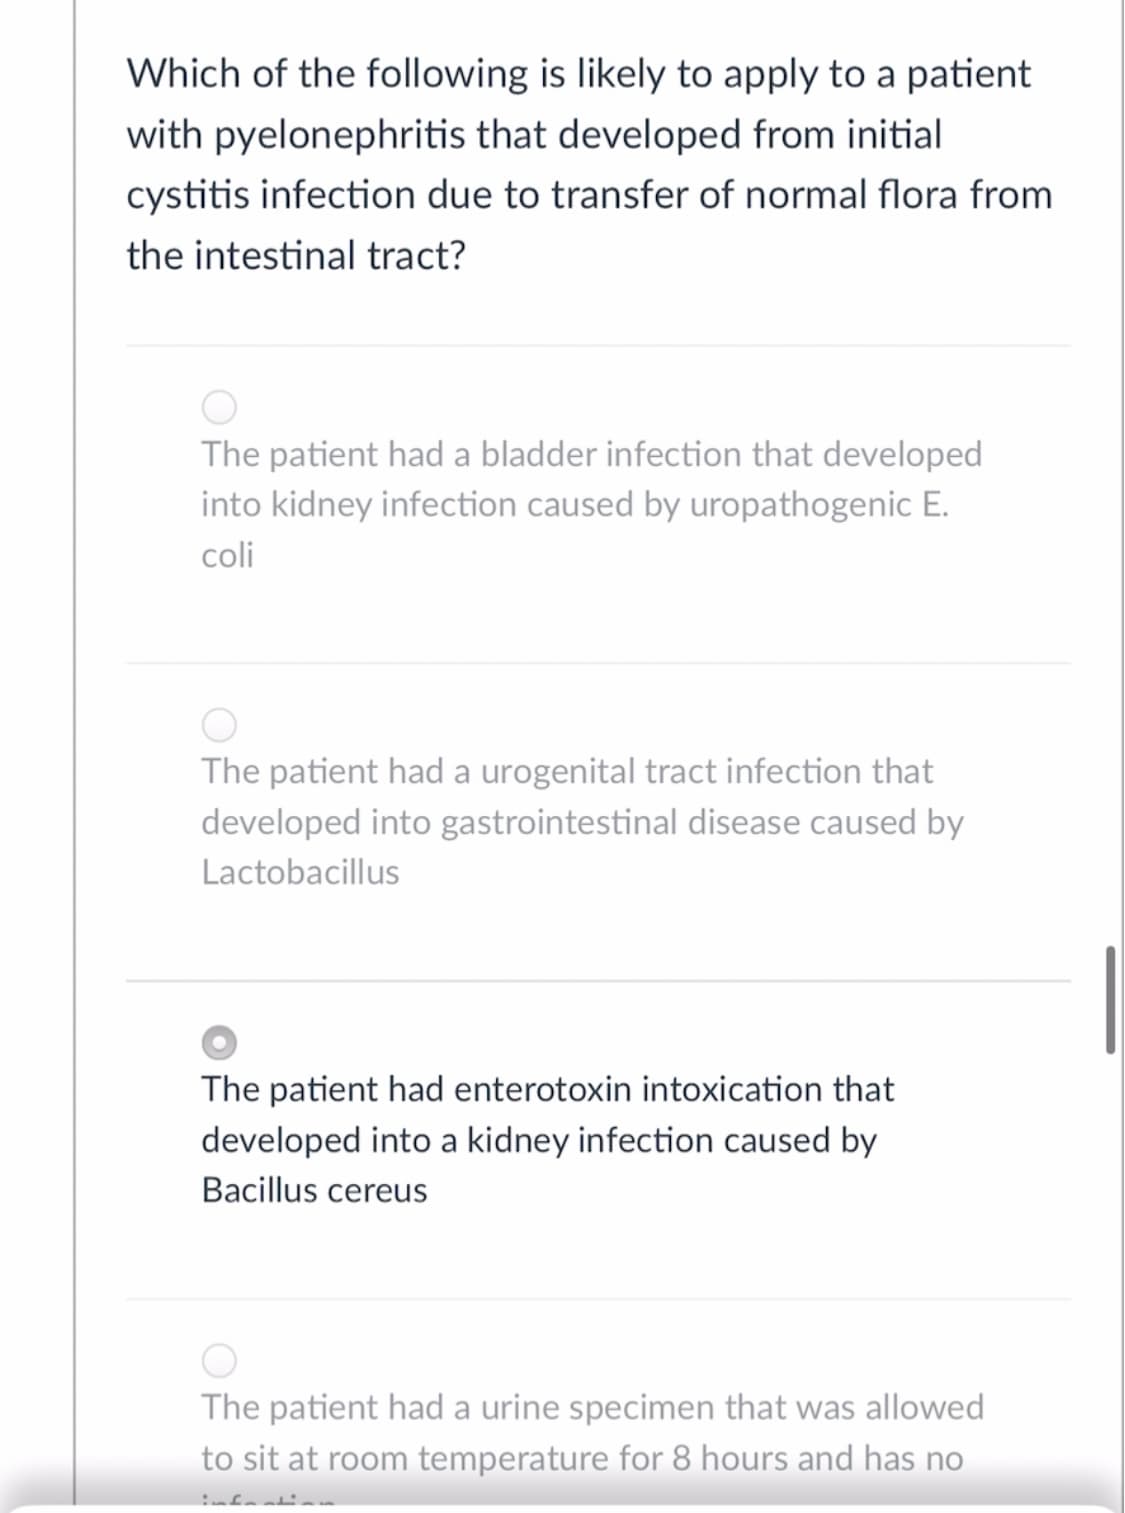 Which of the following is likely to apply to a patient
with pyelonephritis that developed from initial
cystitis infection due to transfer of normal flora from
the intestinal tract?
The patient had a bladder infection that developed
into kidney infection caused by uropathogenic E.
coli
The patient had a urogenital tract infection that
developed into gastrointestinal disease caused by
Lactobacillus
The patient had enterotoxin intoxication that
developed into a kidney infection caused by
Bacillus cereus
The patient had a urine specimen that was allowed
to sit at room temperature for 8 hours and has no
